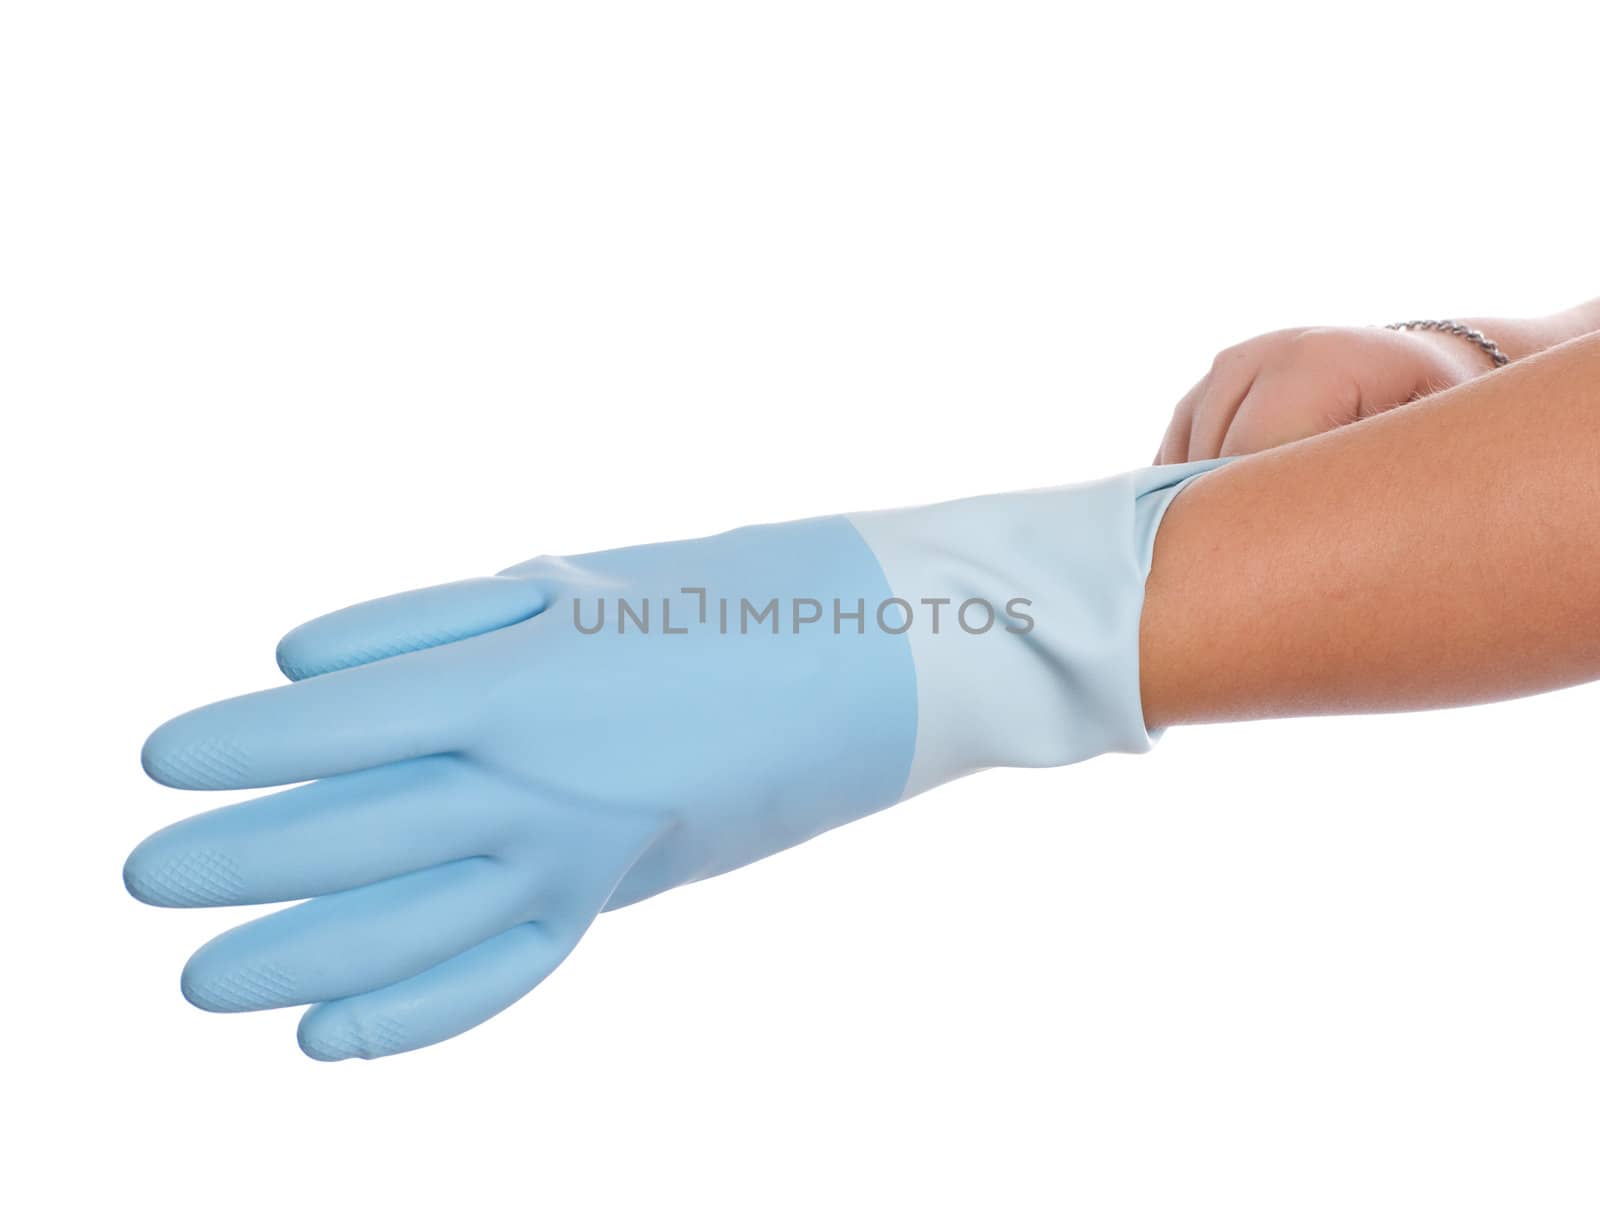 Closeup view of someone putting on a blue rubber glove, isolated against a white background